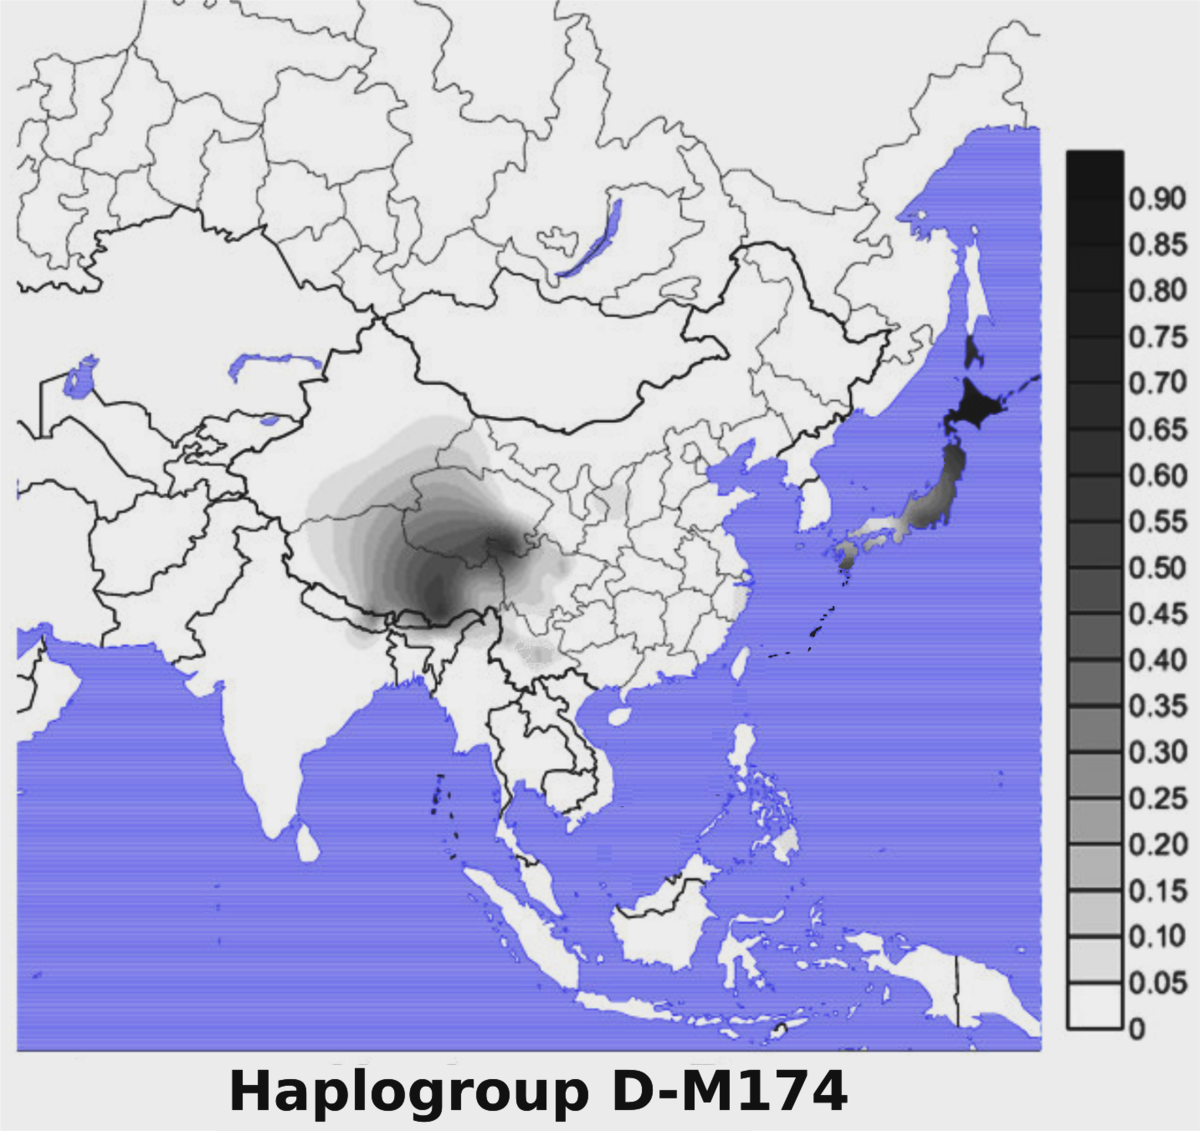 Geographic_distributions_of_Y_chromosome_haplogroups_D-M174_in_East_Asia.png